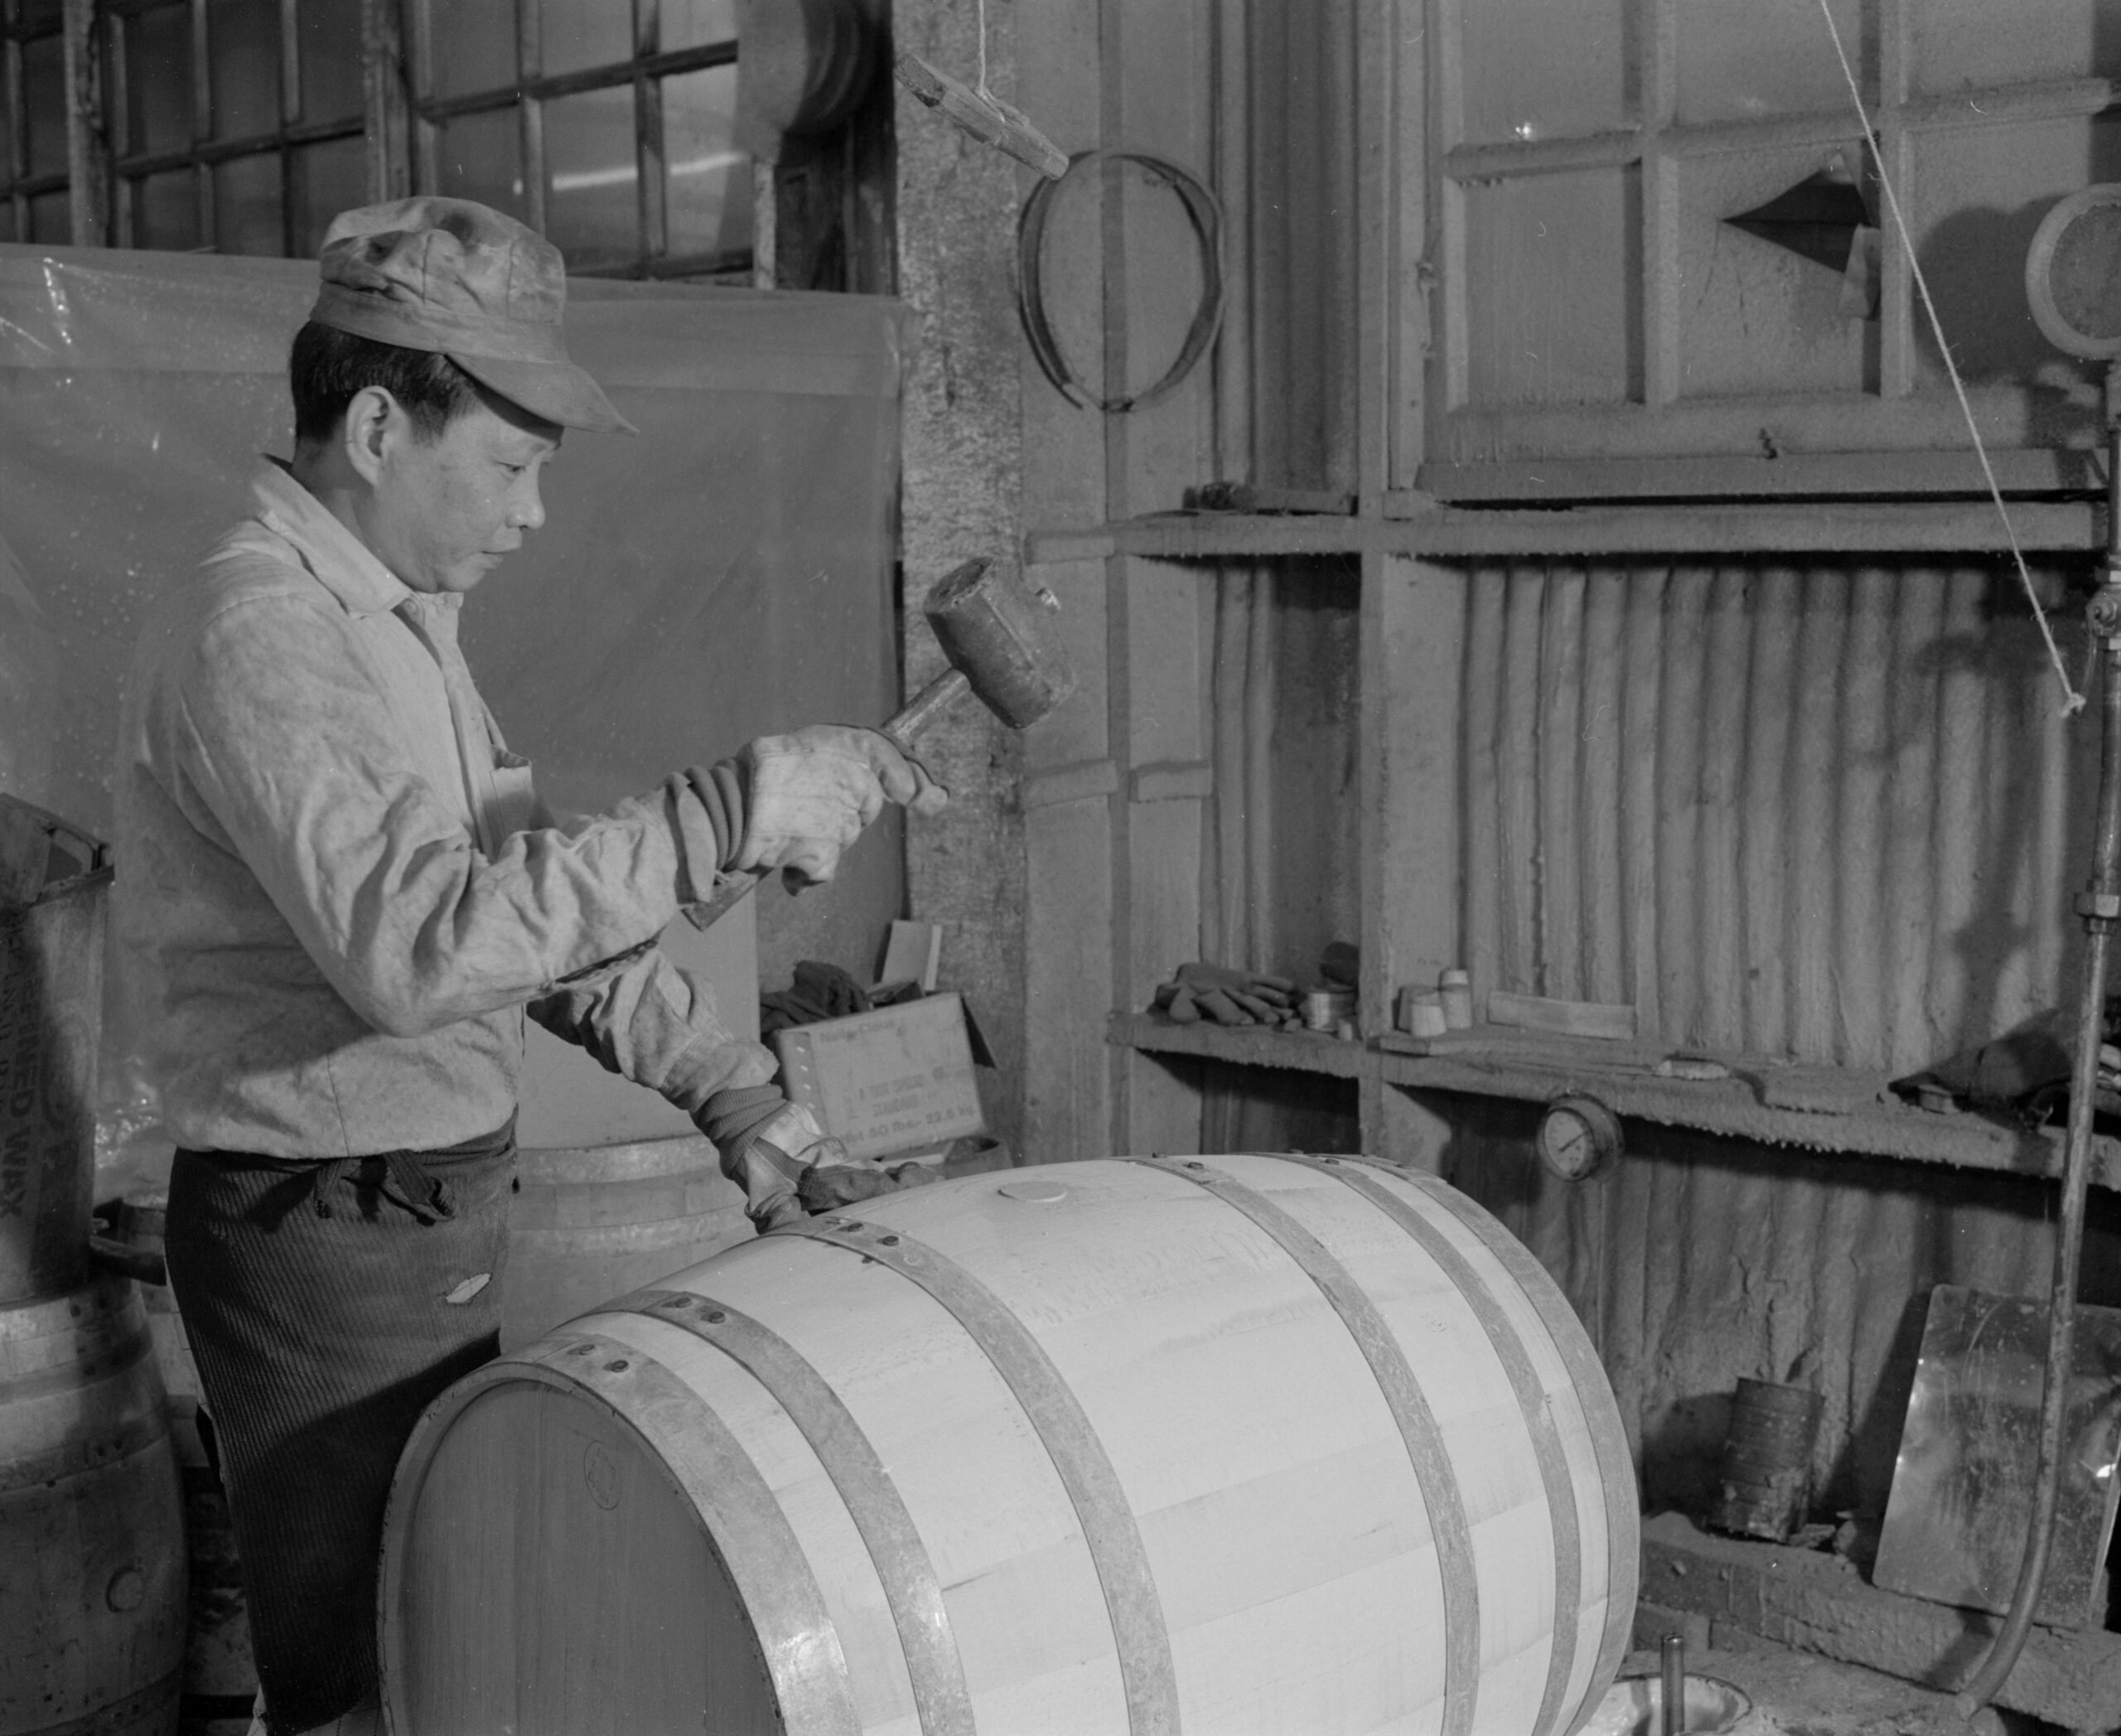 Worker at Sweeney Cooperage using a mallet to plug a barrel, 1978. Reference code: AM1376-F19-: 2018.003.09